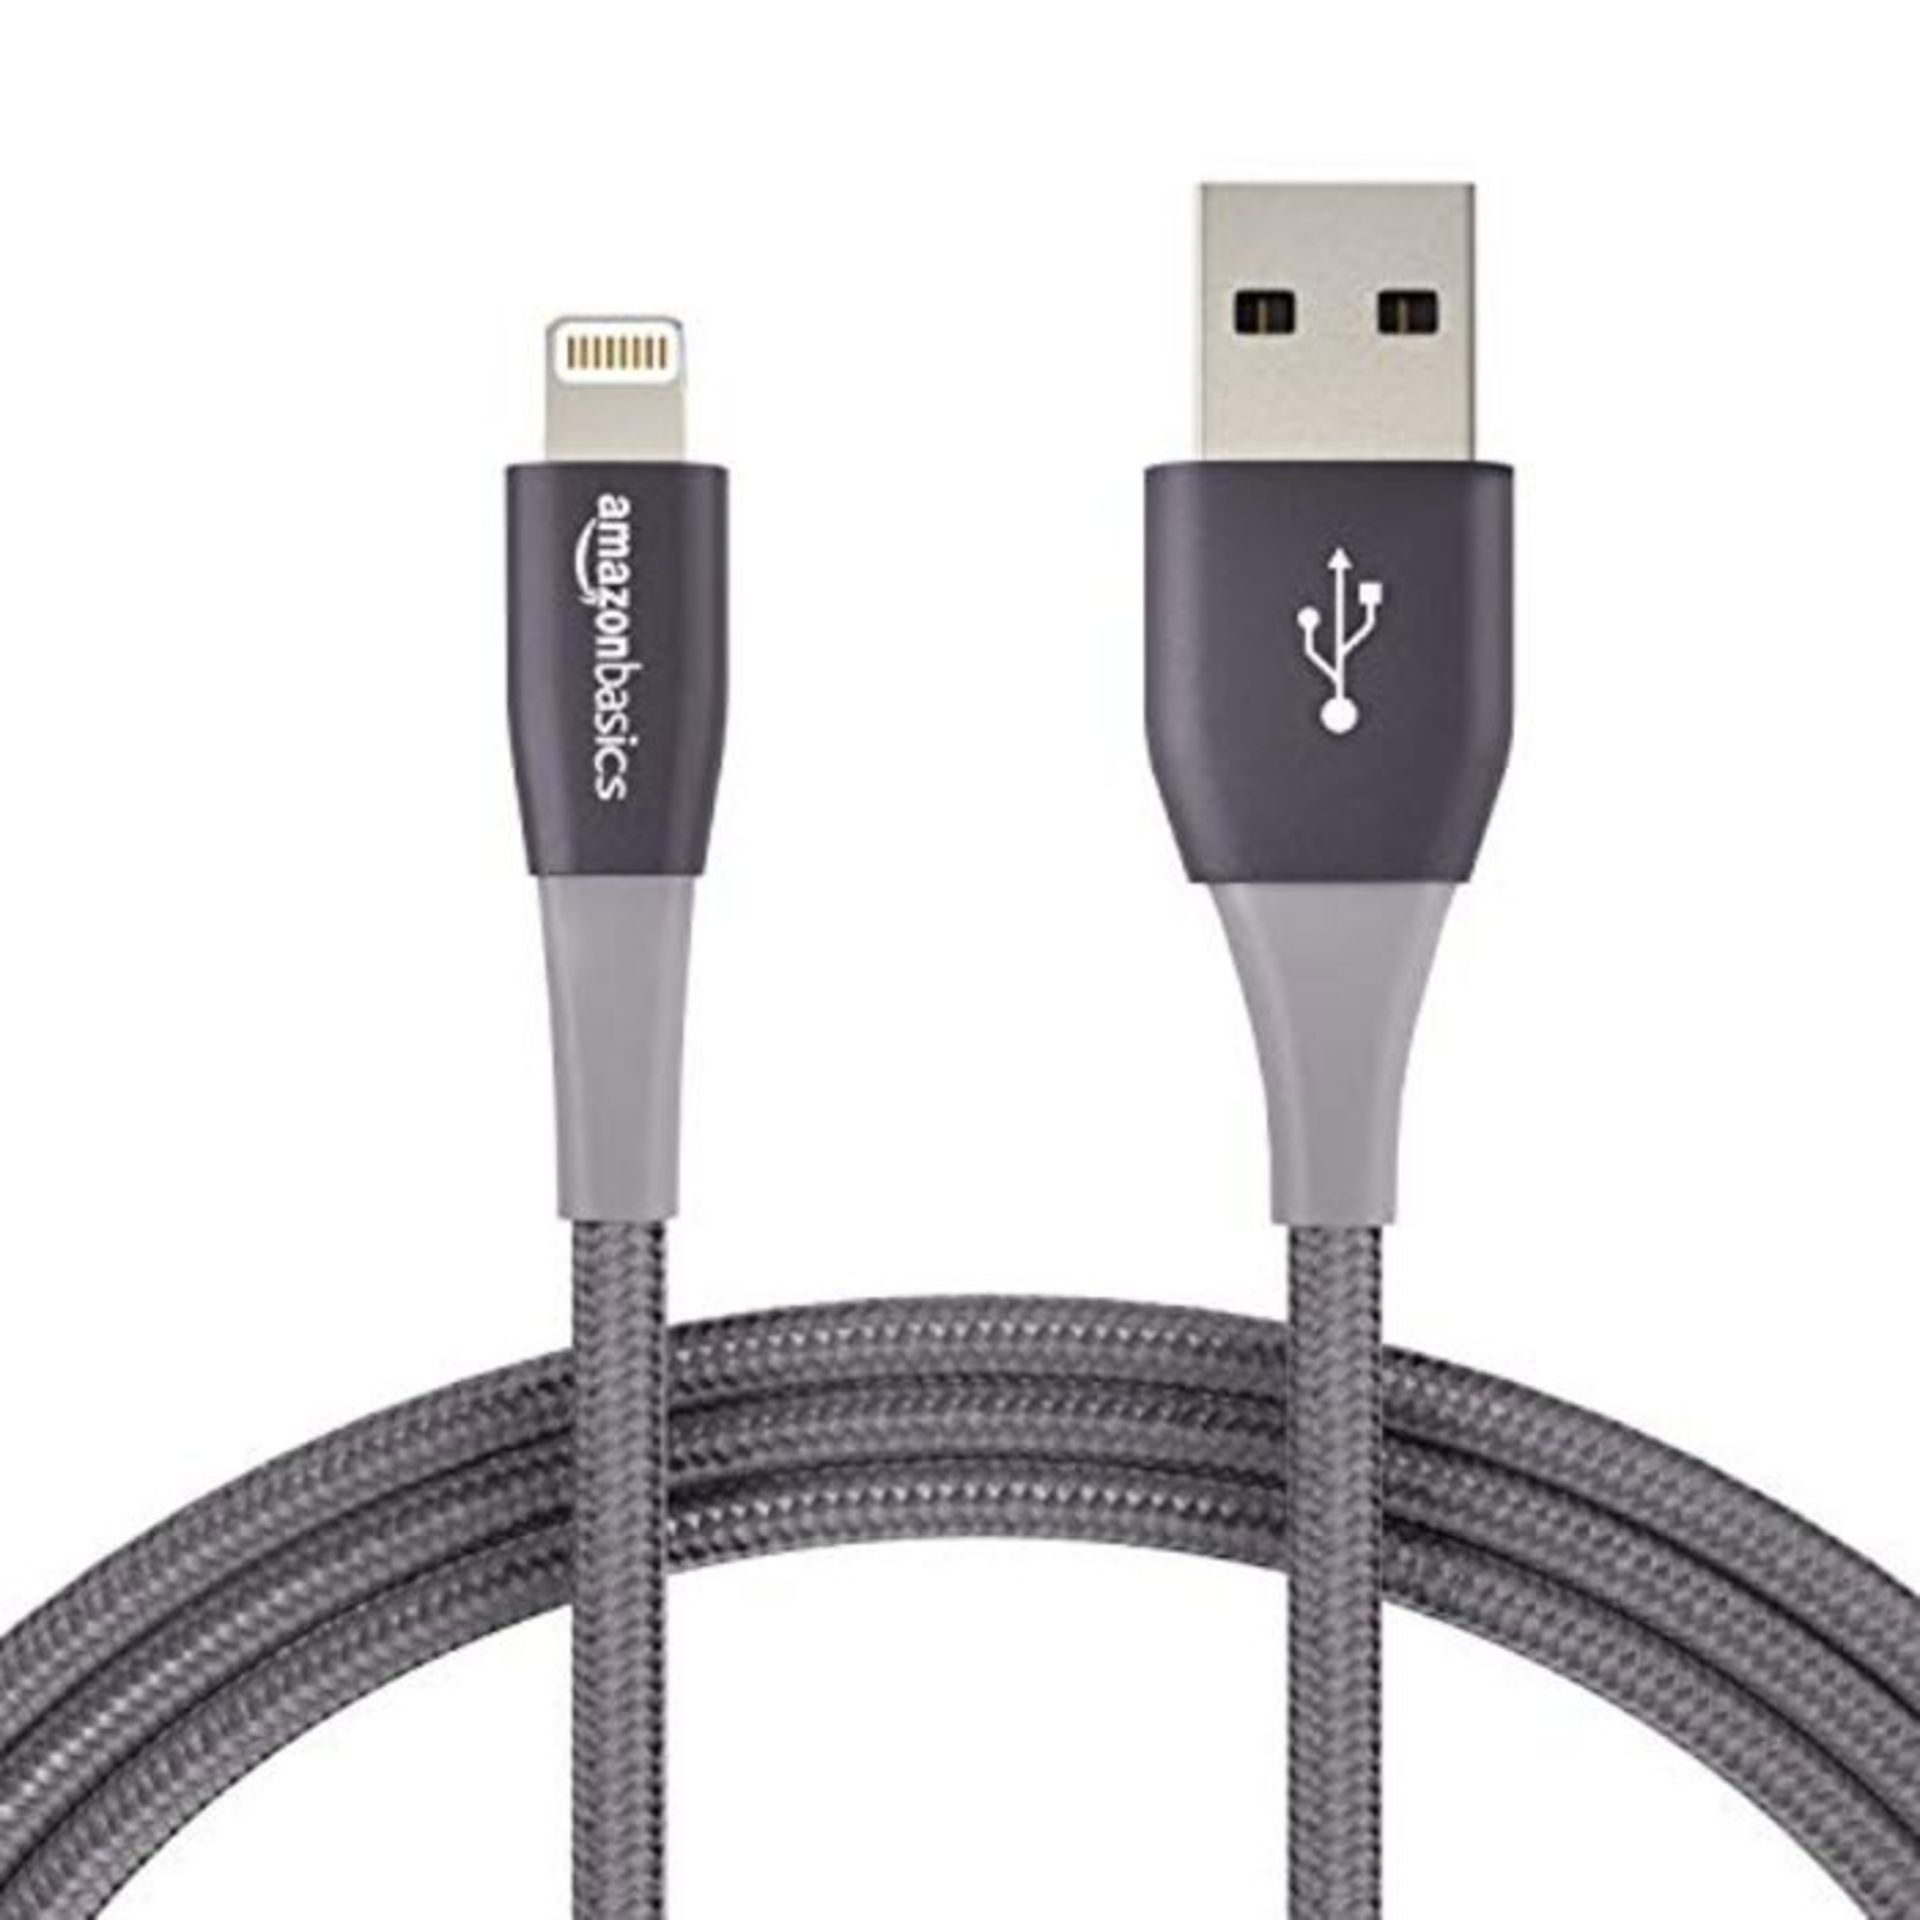 Amazon Basics Double Nylon Braided USB A Cable with Lightning Connector, Premium Colle